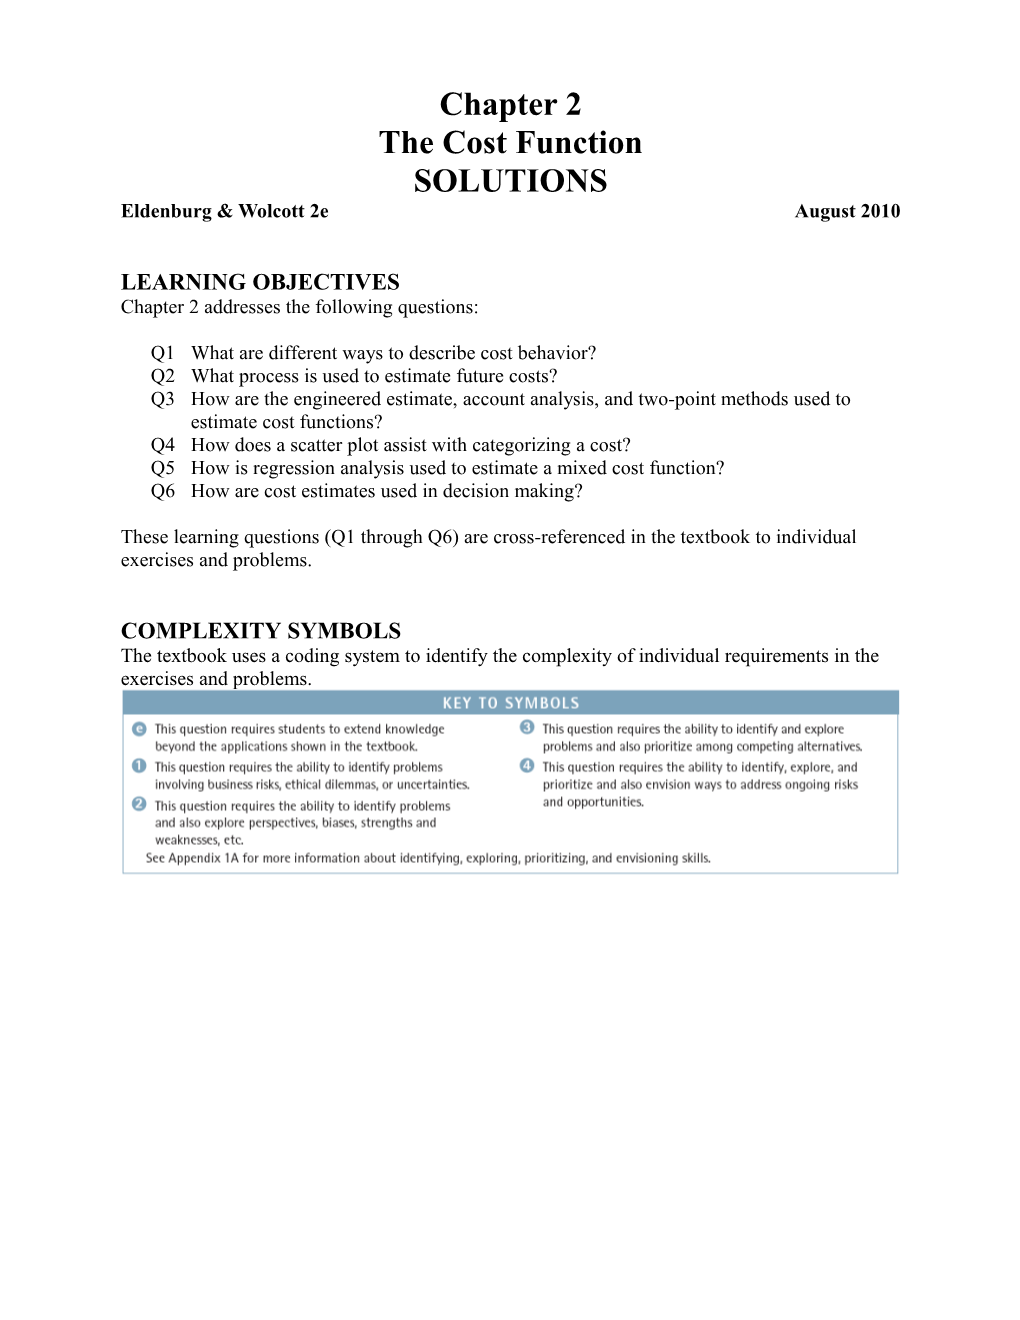 Solutions for Problems in Chapter 1